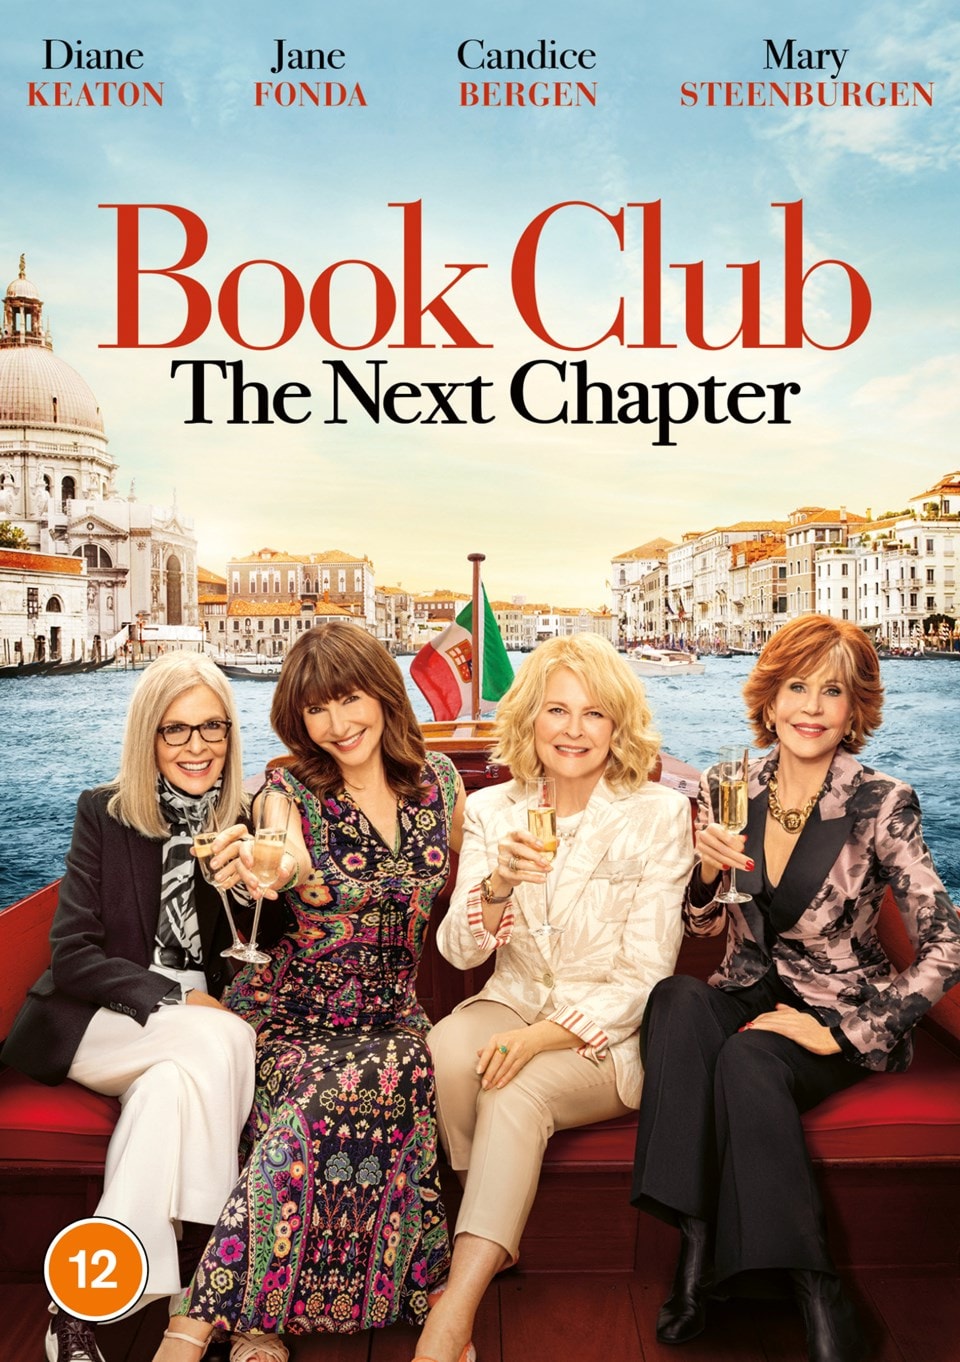 Book Club: The Next Chapter | DVD | Free shipping over £20 | HMV Store